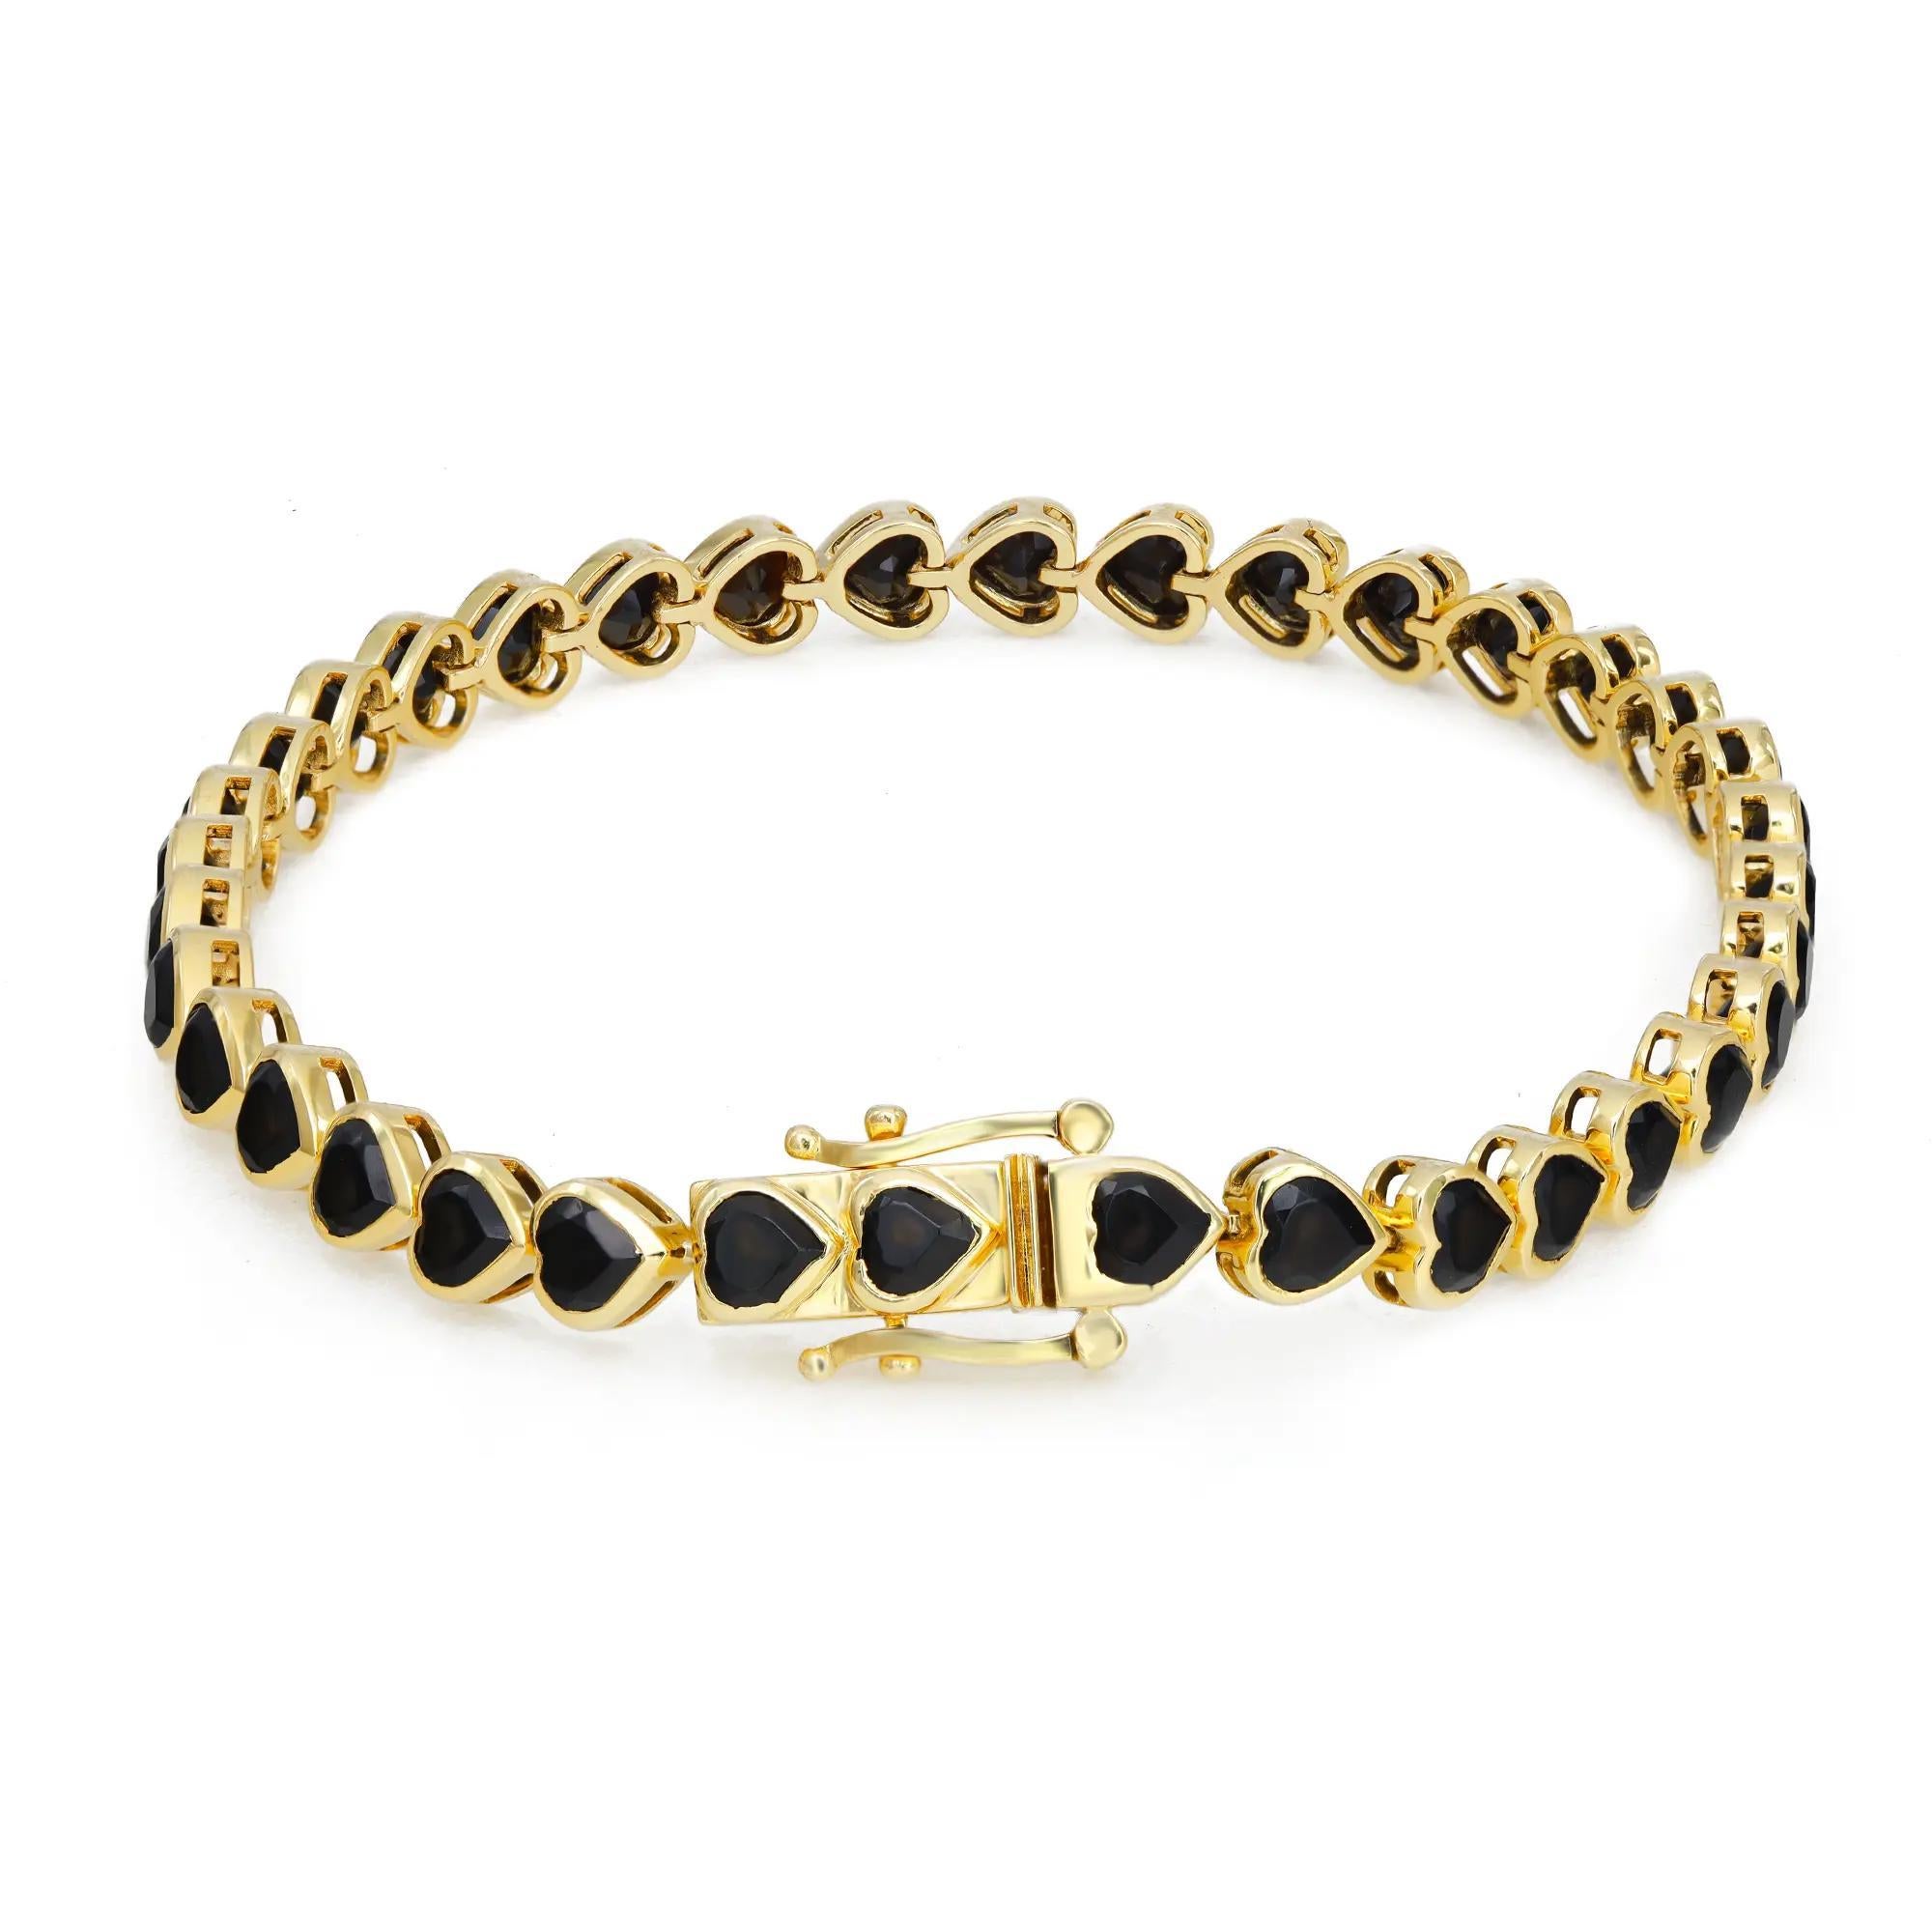 Fabulous and Chic, this Onyx tennis bracelet is a perfect addition to your wrist stack. Featuring, 36 heart shape black Onyx studded in a bezel setting in 14K yellow gold. Total Onyx weight: 7.90 carats. Secured with box clasp. Bracelet length: 7.5